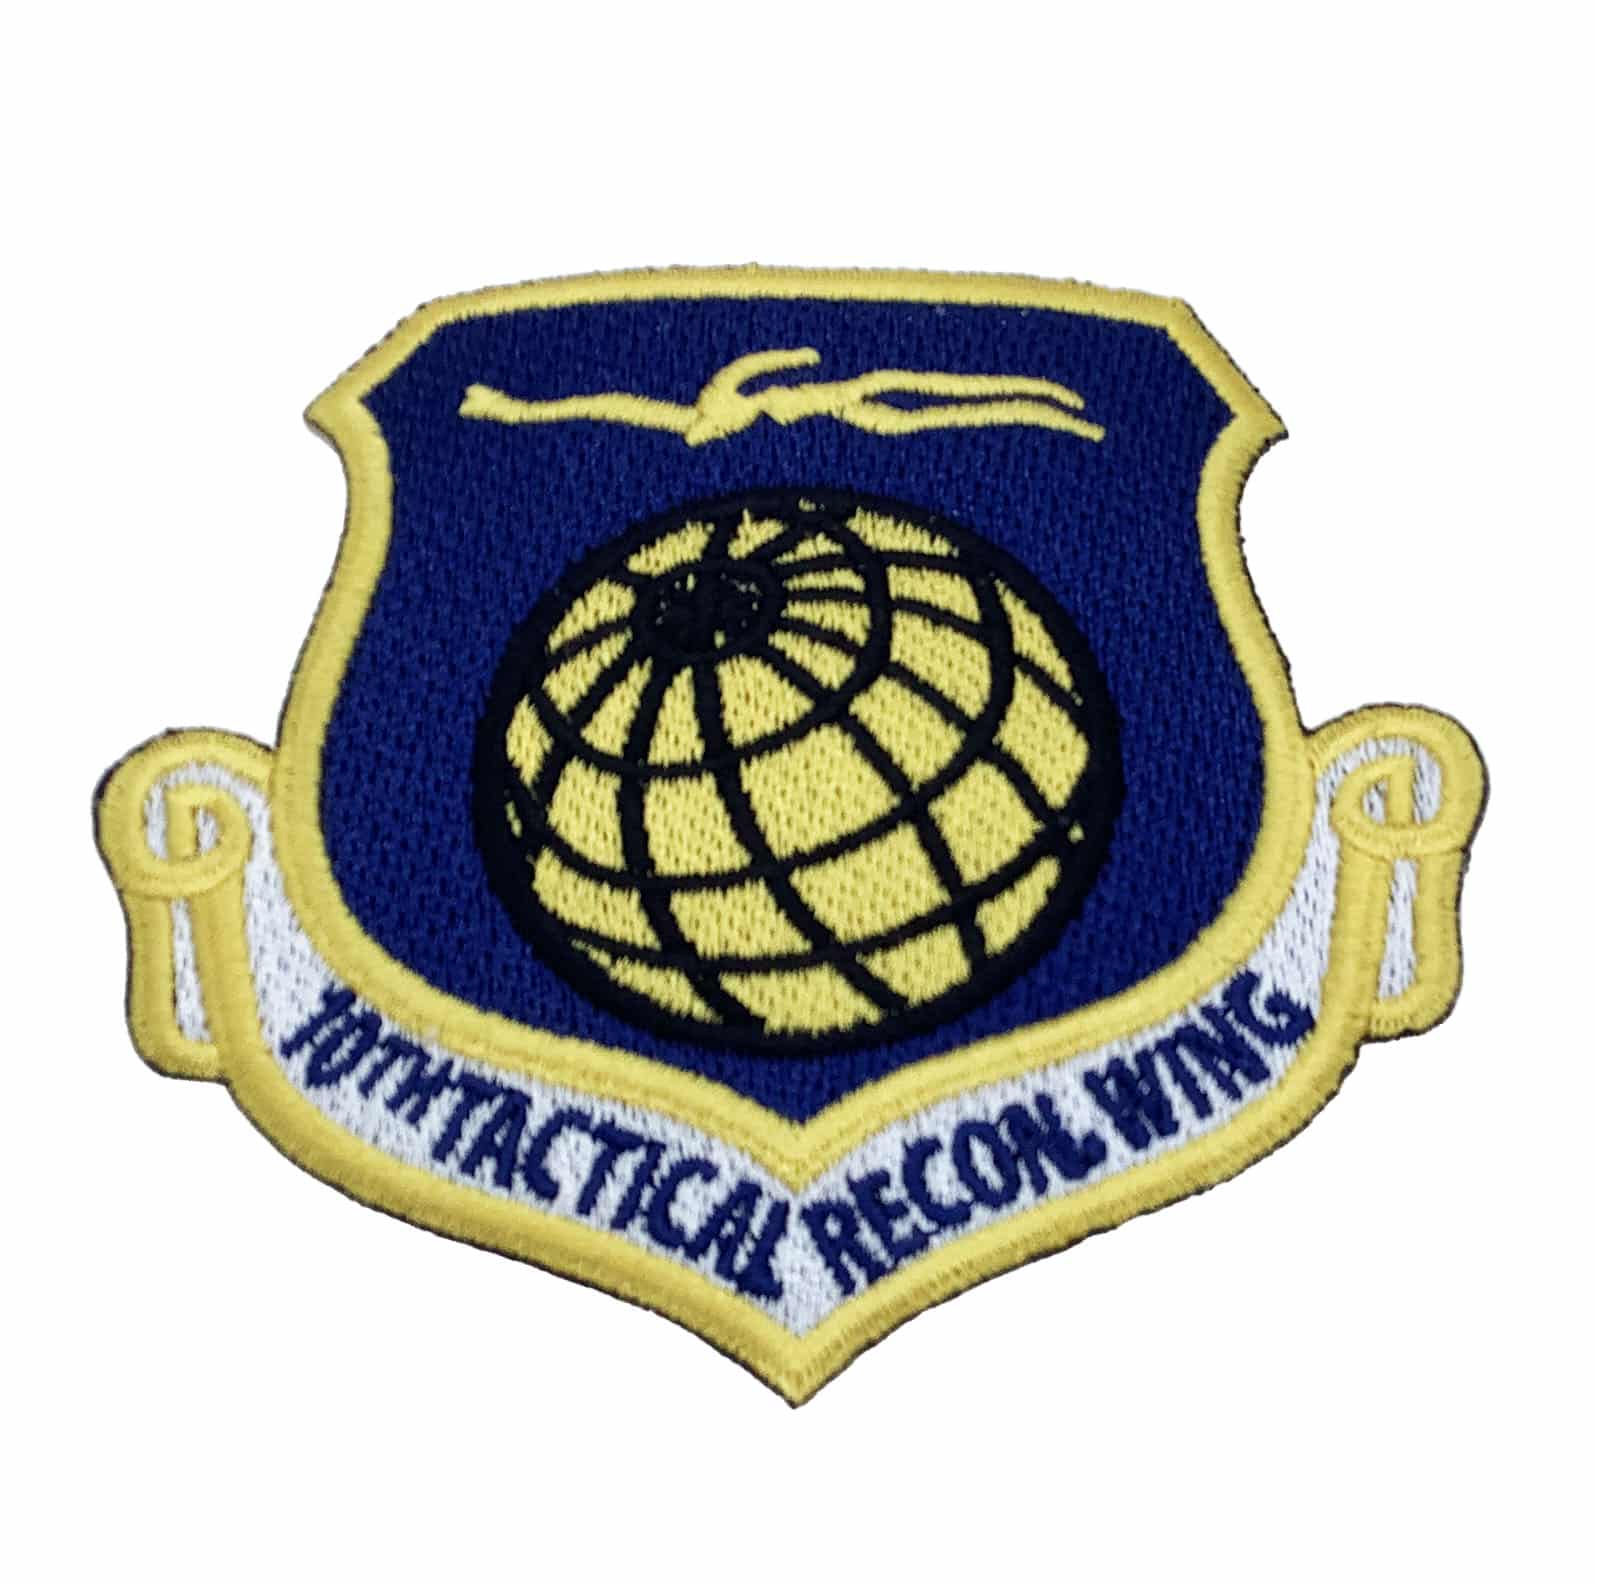 10TH TRW Patch - With Hook and Loop